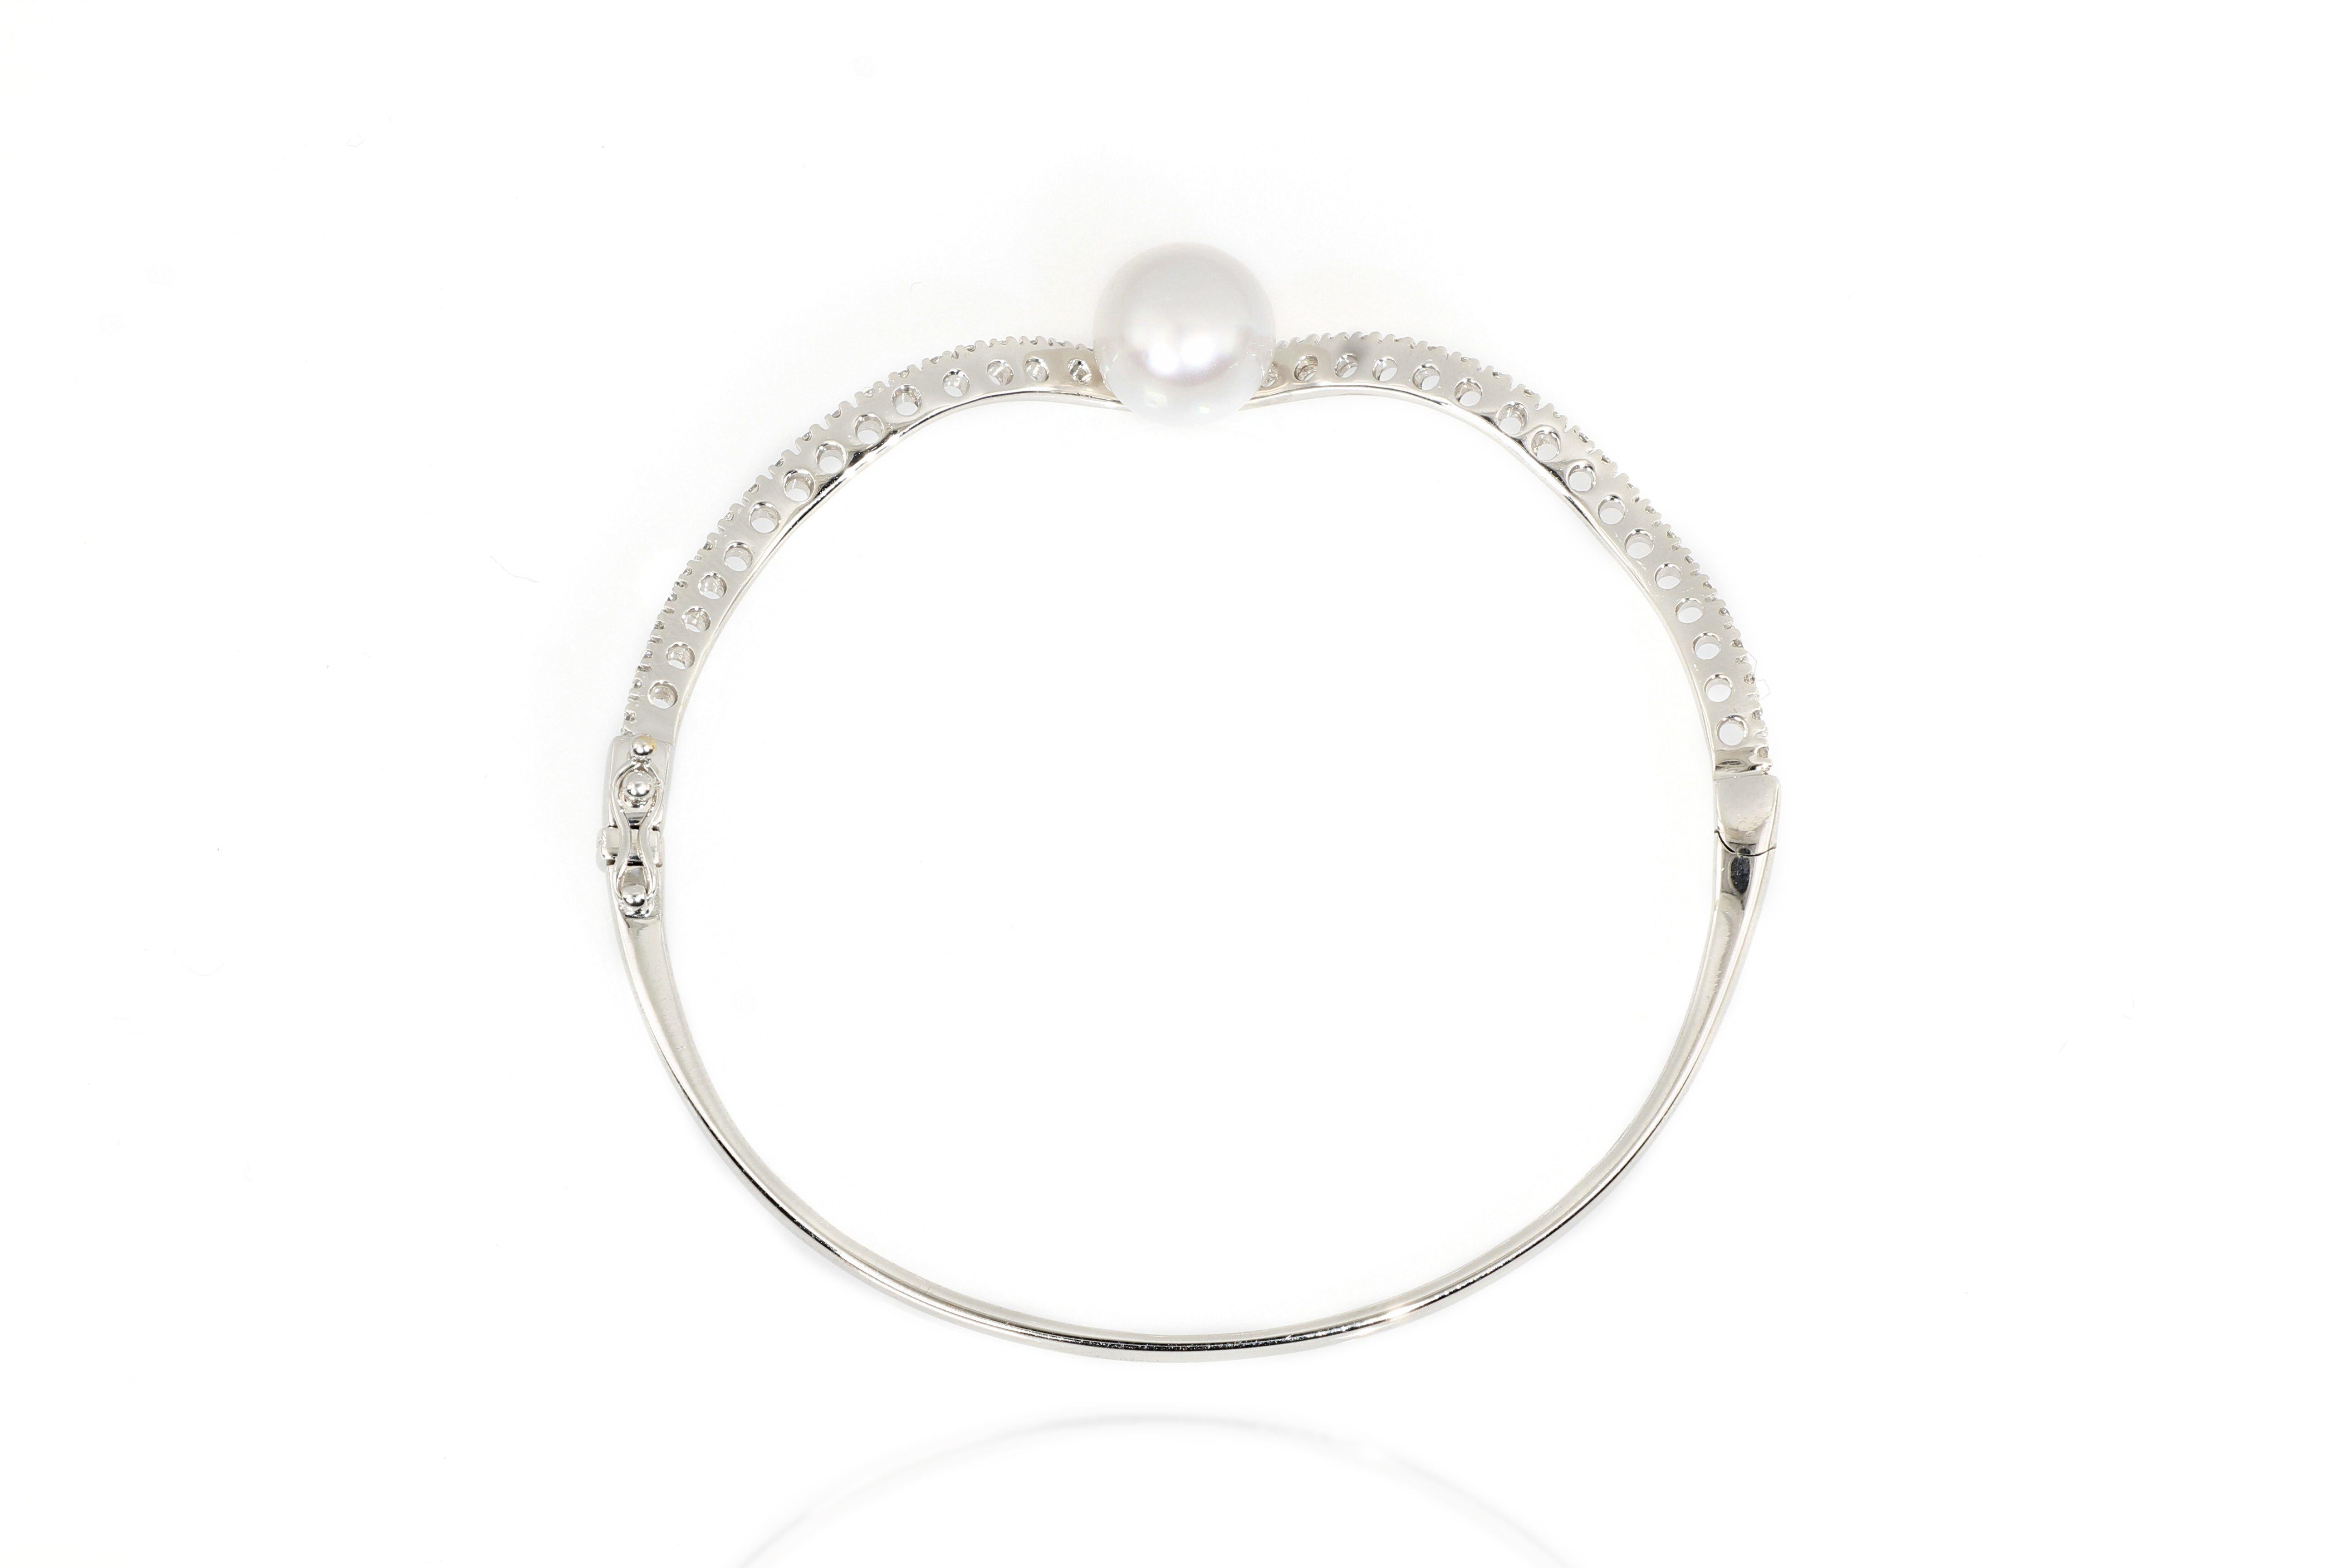  This 18 karat white gold bangle is set with a 9-10mm South Sea pearl and white Brilliant-cut diamonds weighing 0.38ct. The bangle is in wave shape, very stylish and elegant.
O’Che 1867 was founded one and a half centuries ago in Macau. The brand is